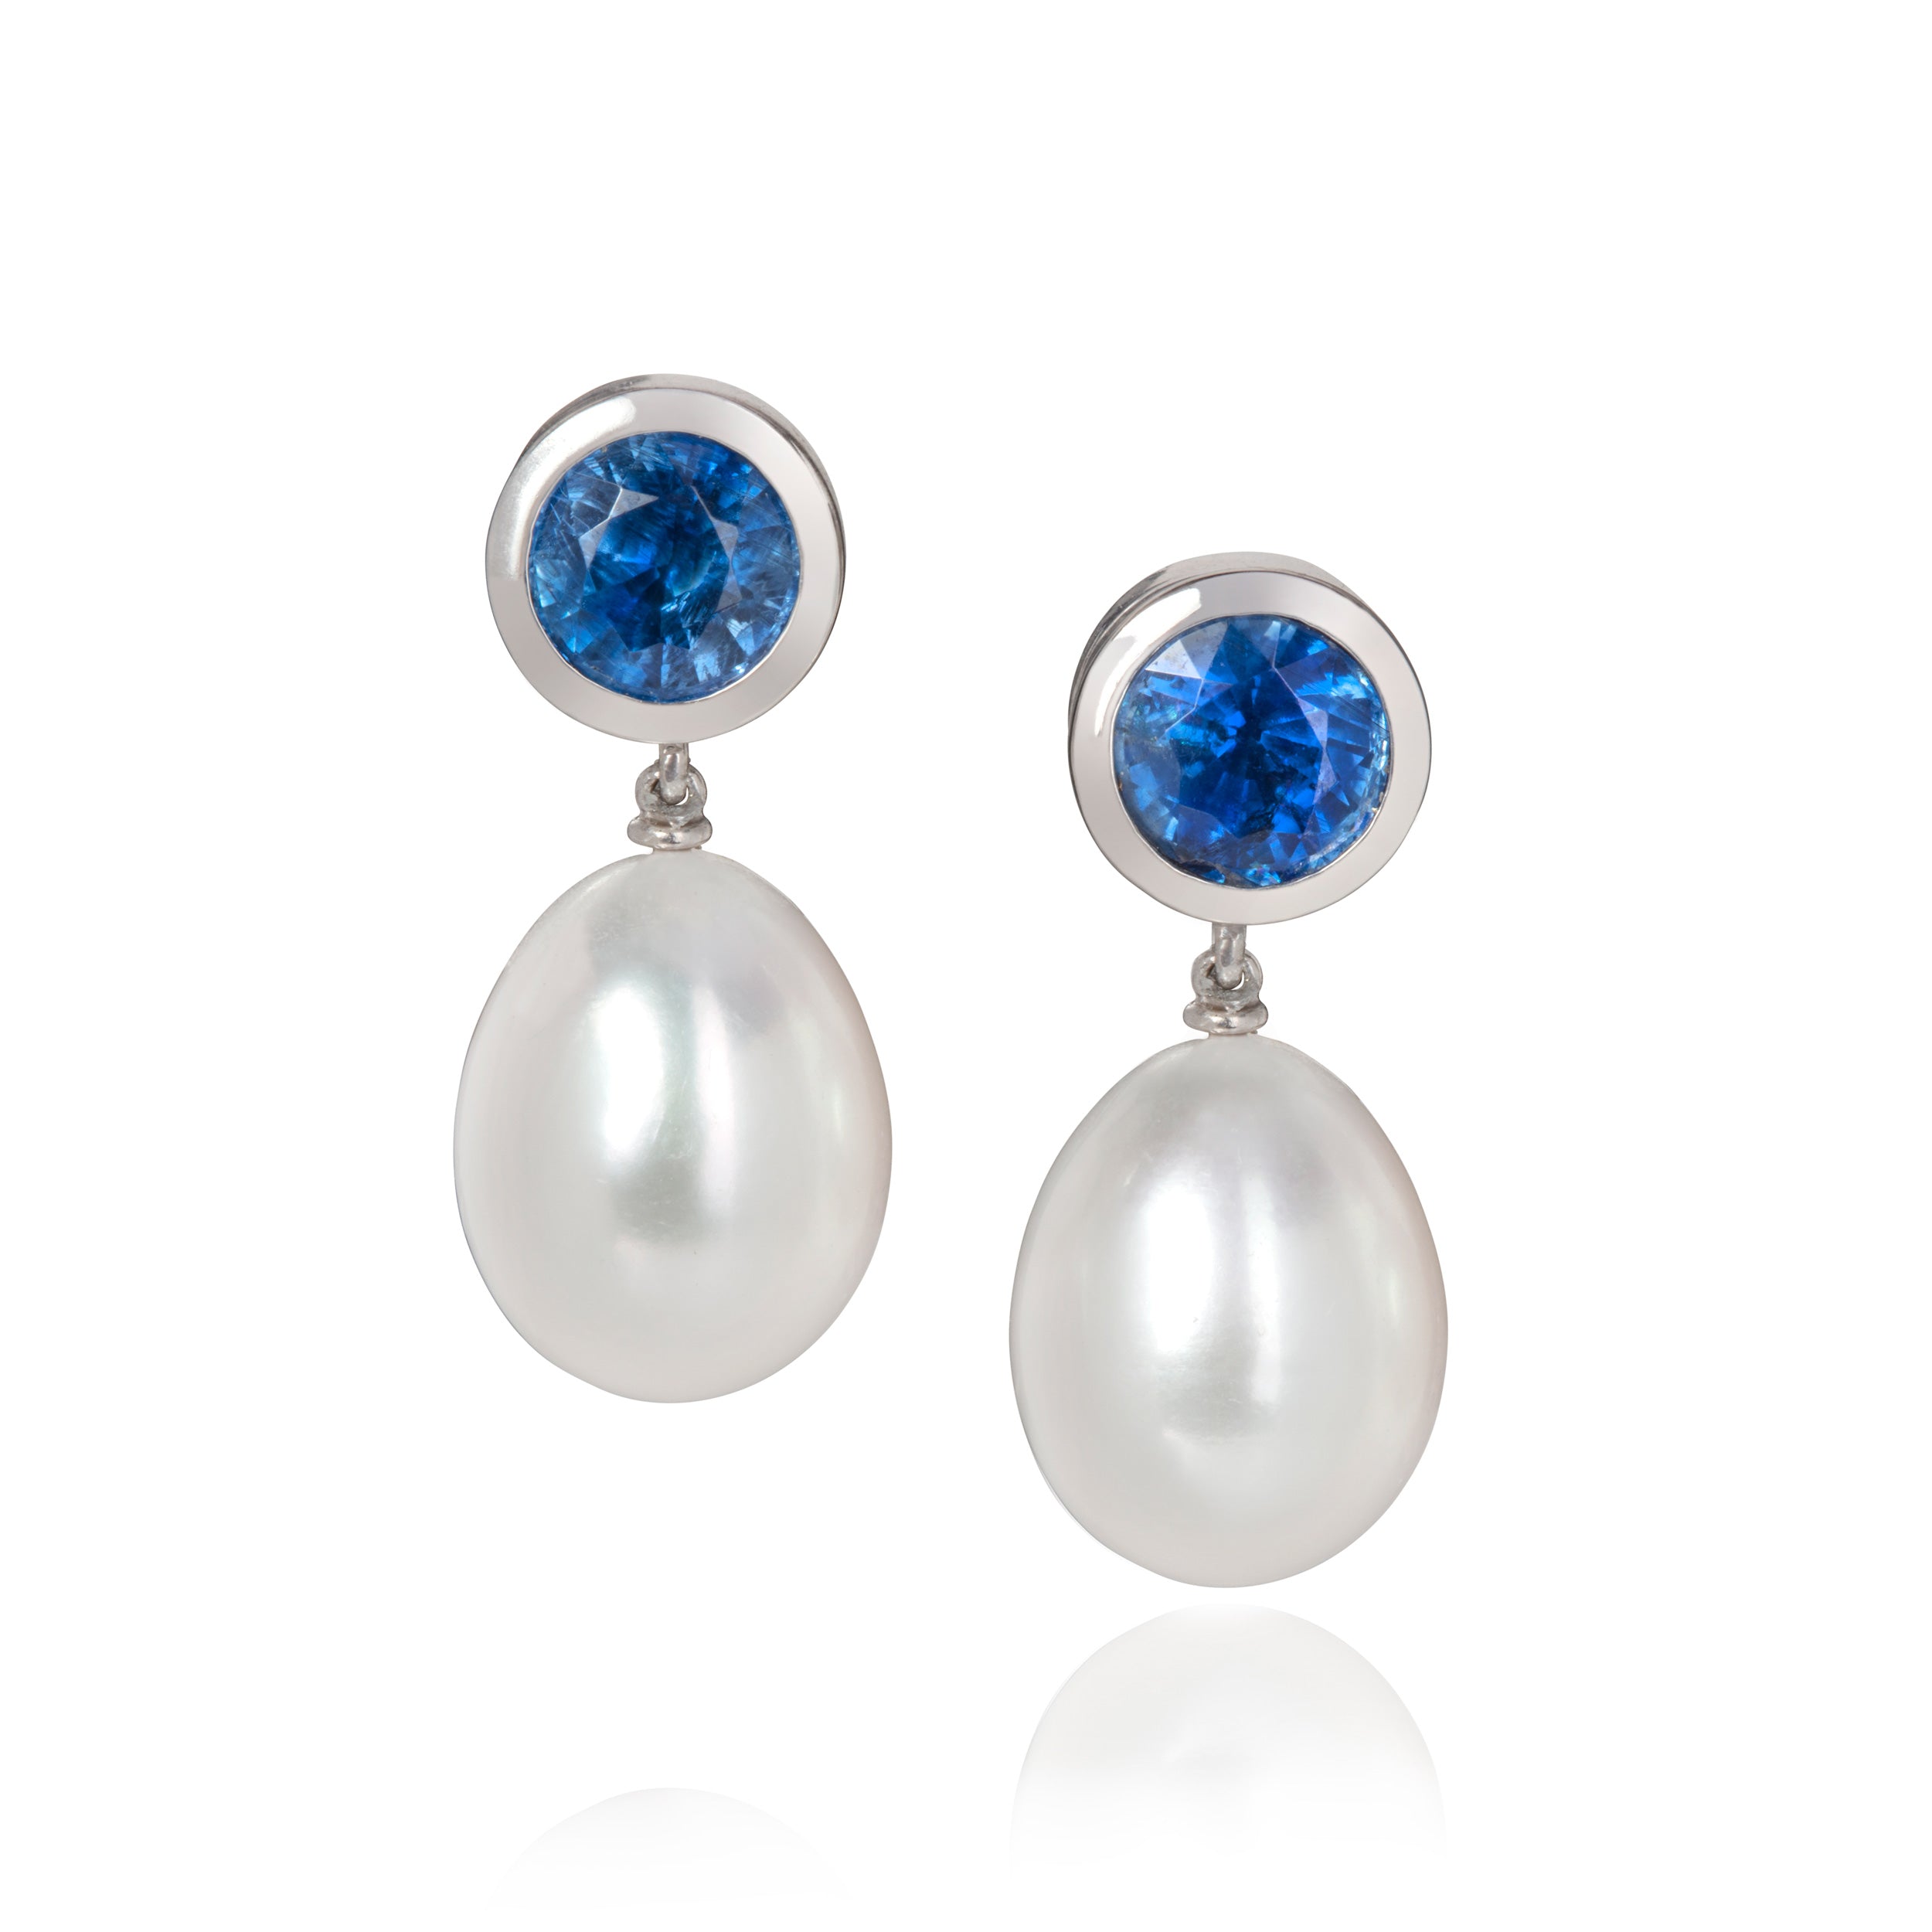 Drop earrings with tanzanite studs set in white gold, with pearl drops